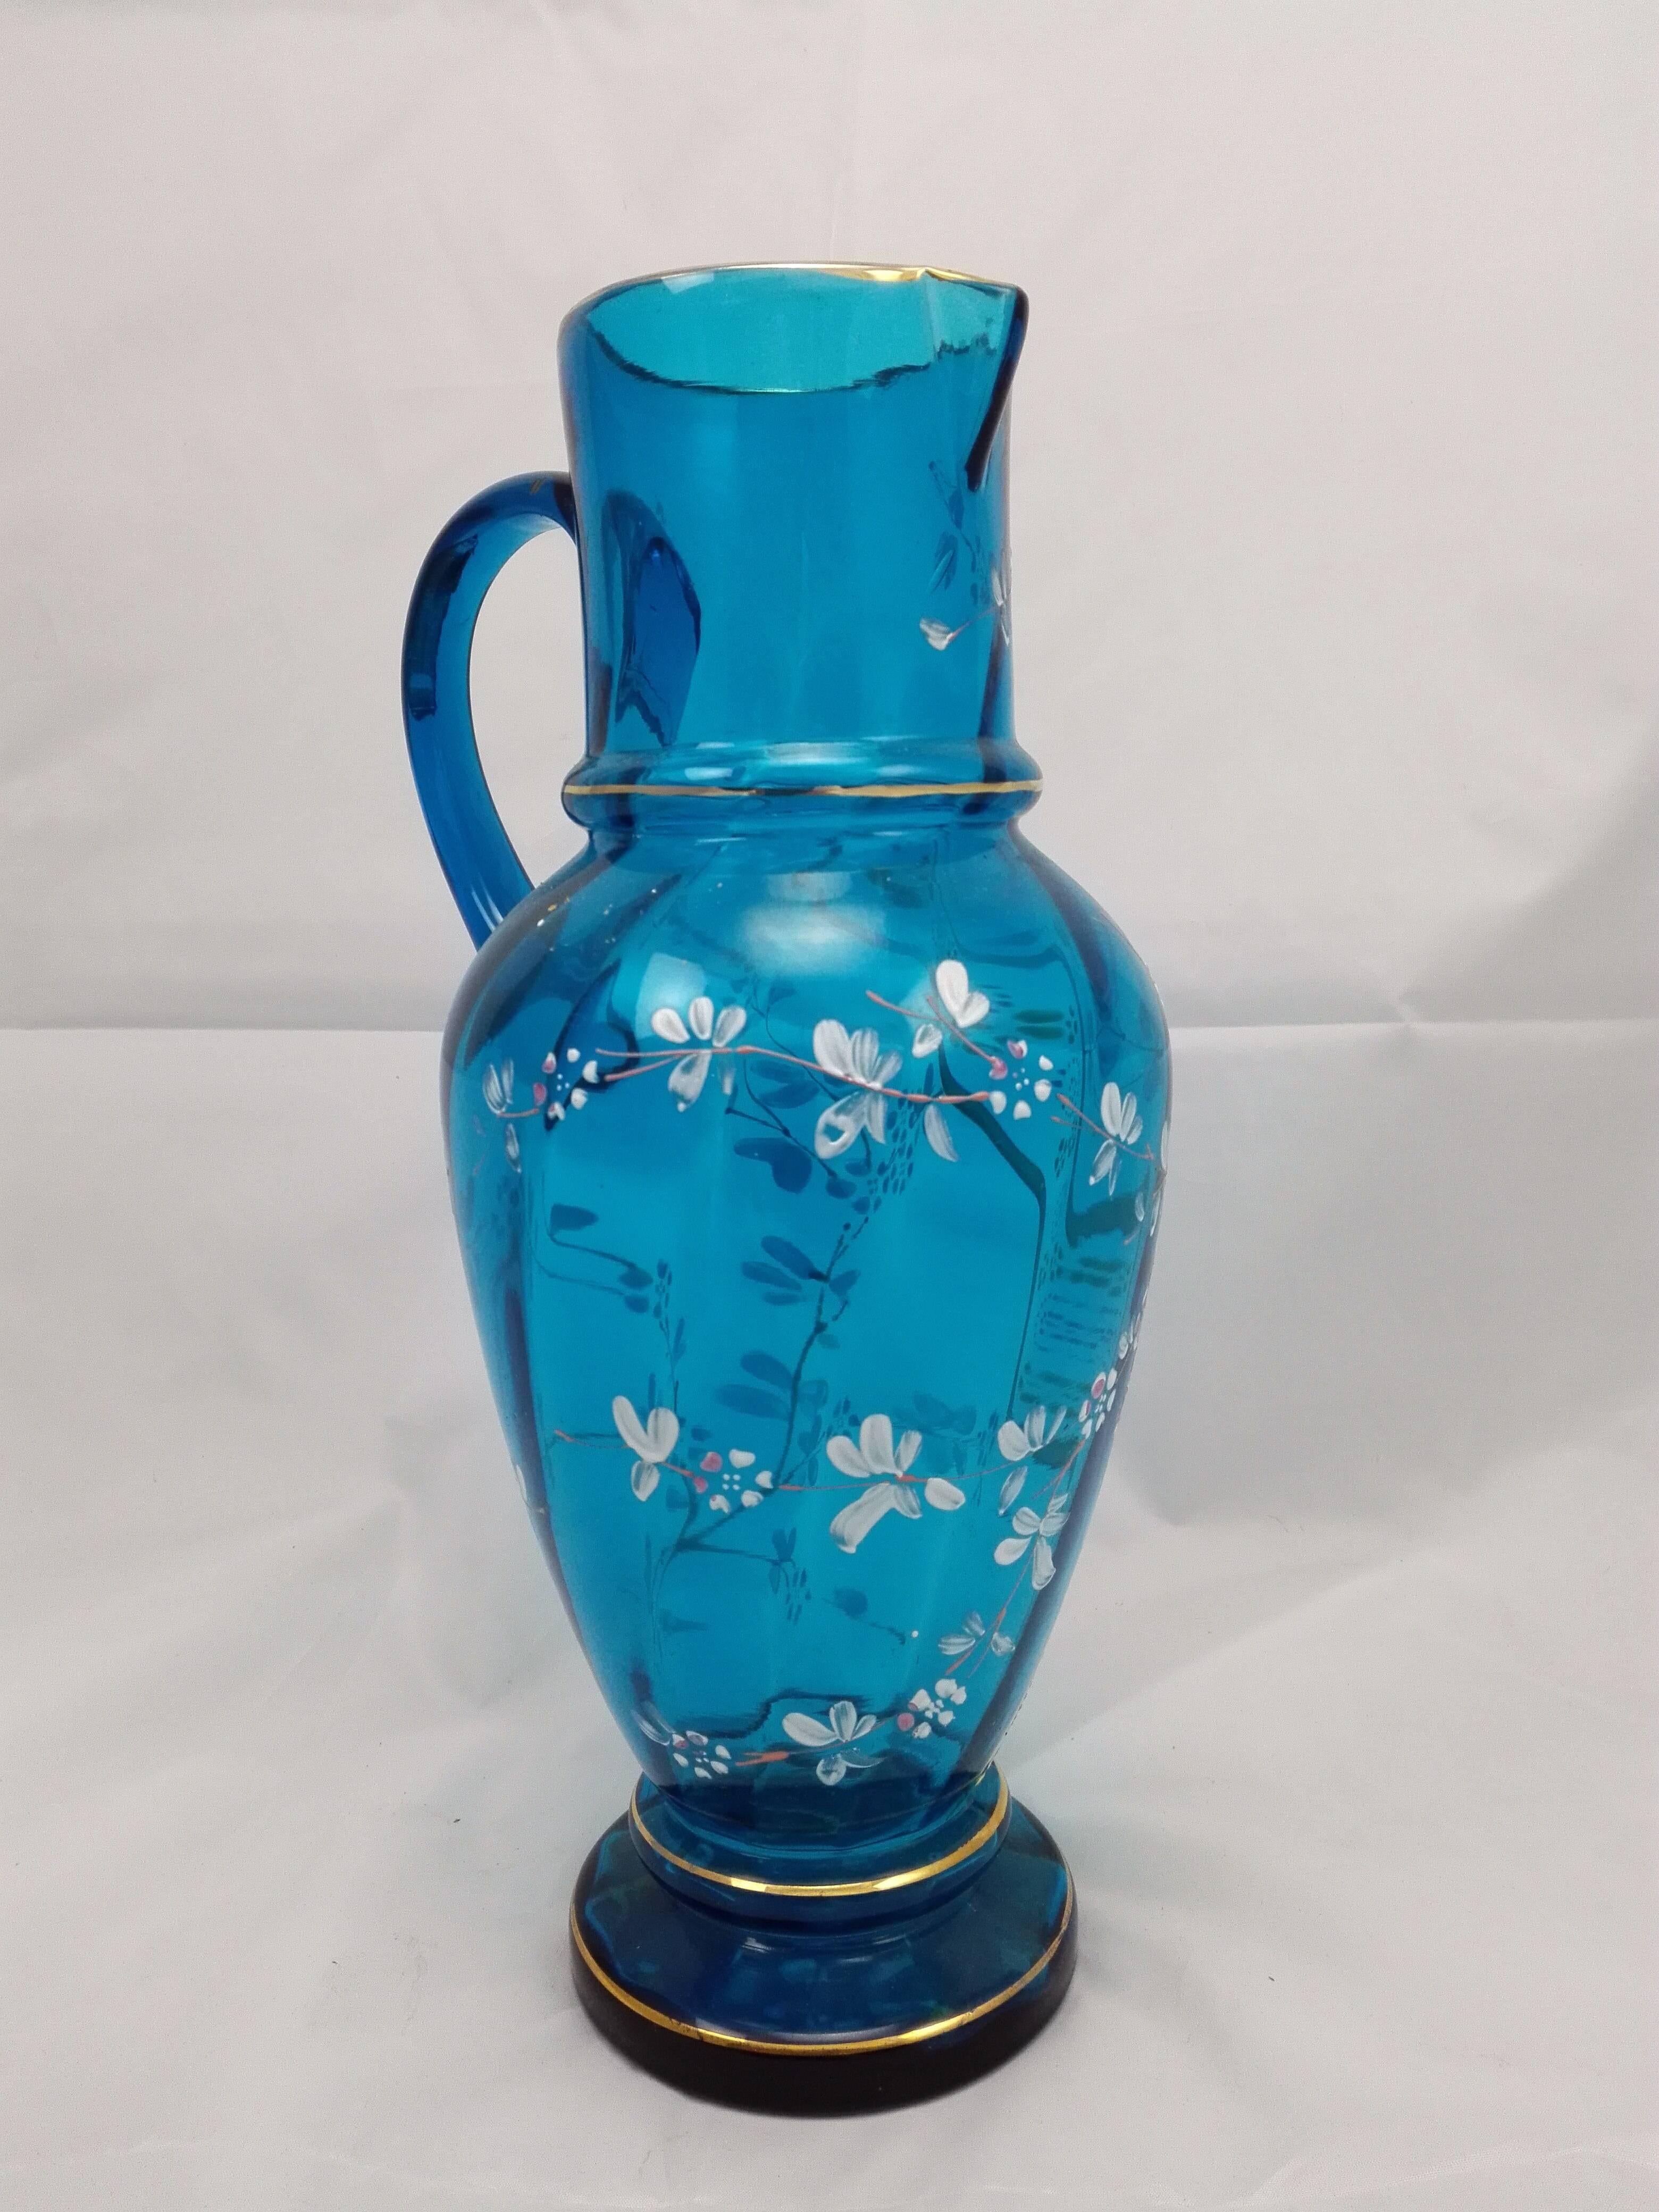 This wonderful German, mouth blown glass jug in light blue colour and hand-painted its one of a kind! In super condition with no cracks! Only clean it up and use! The design its just sensational!